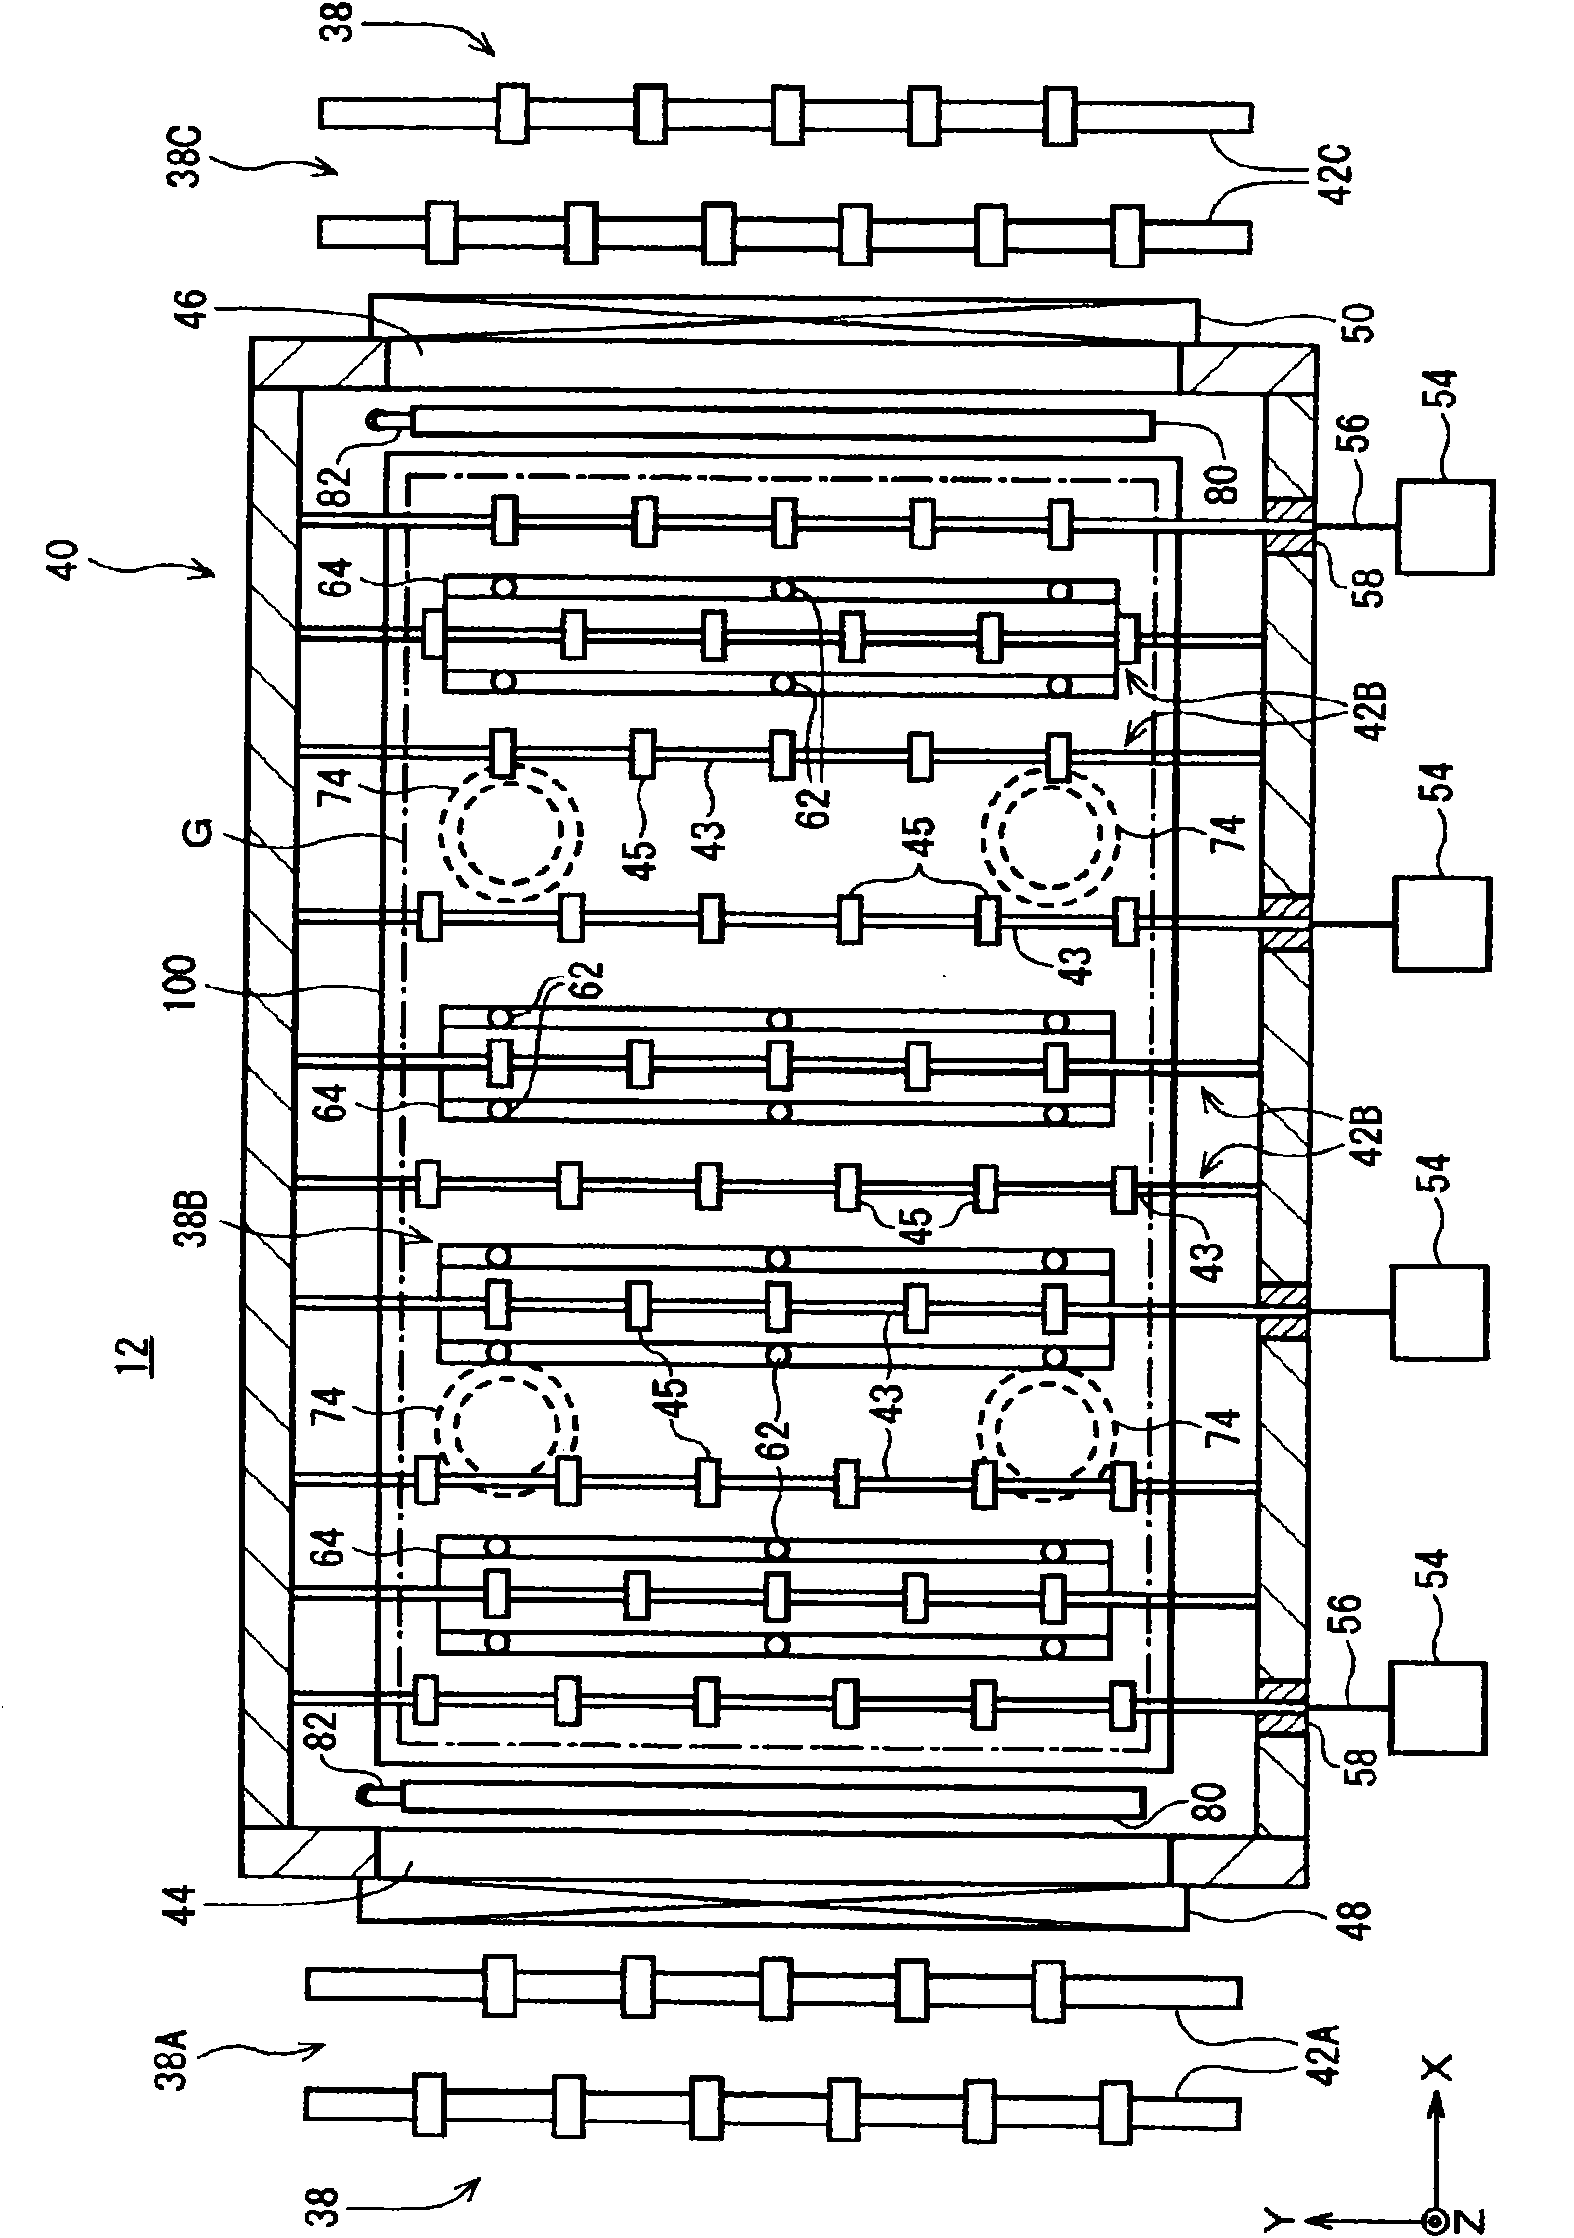 Decompression drying apparatus